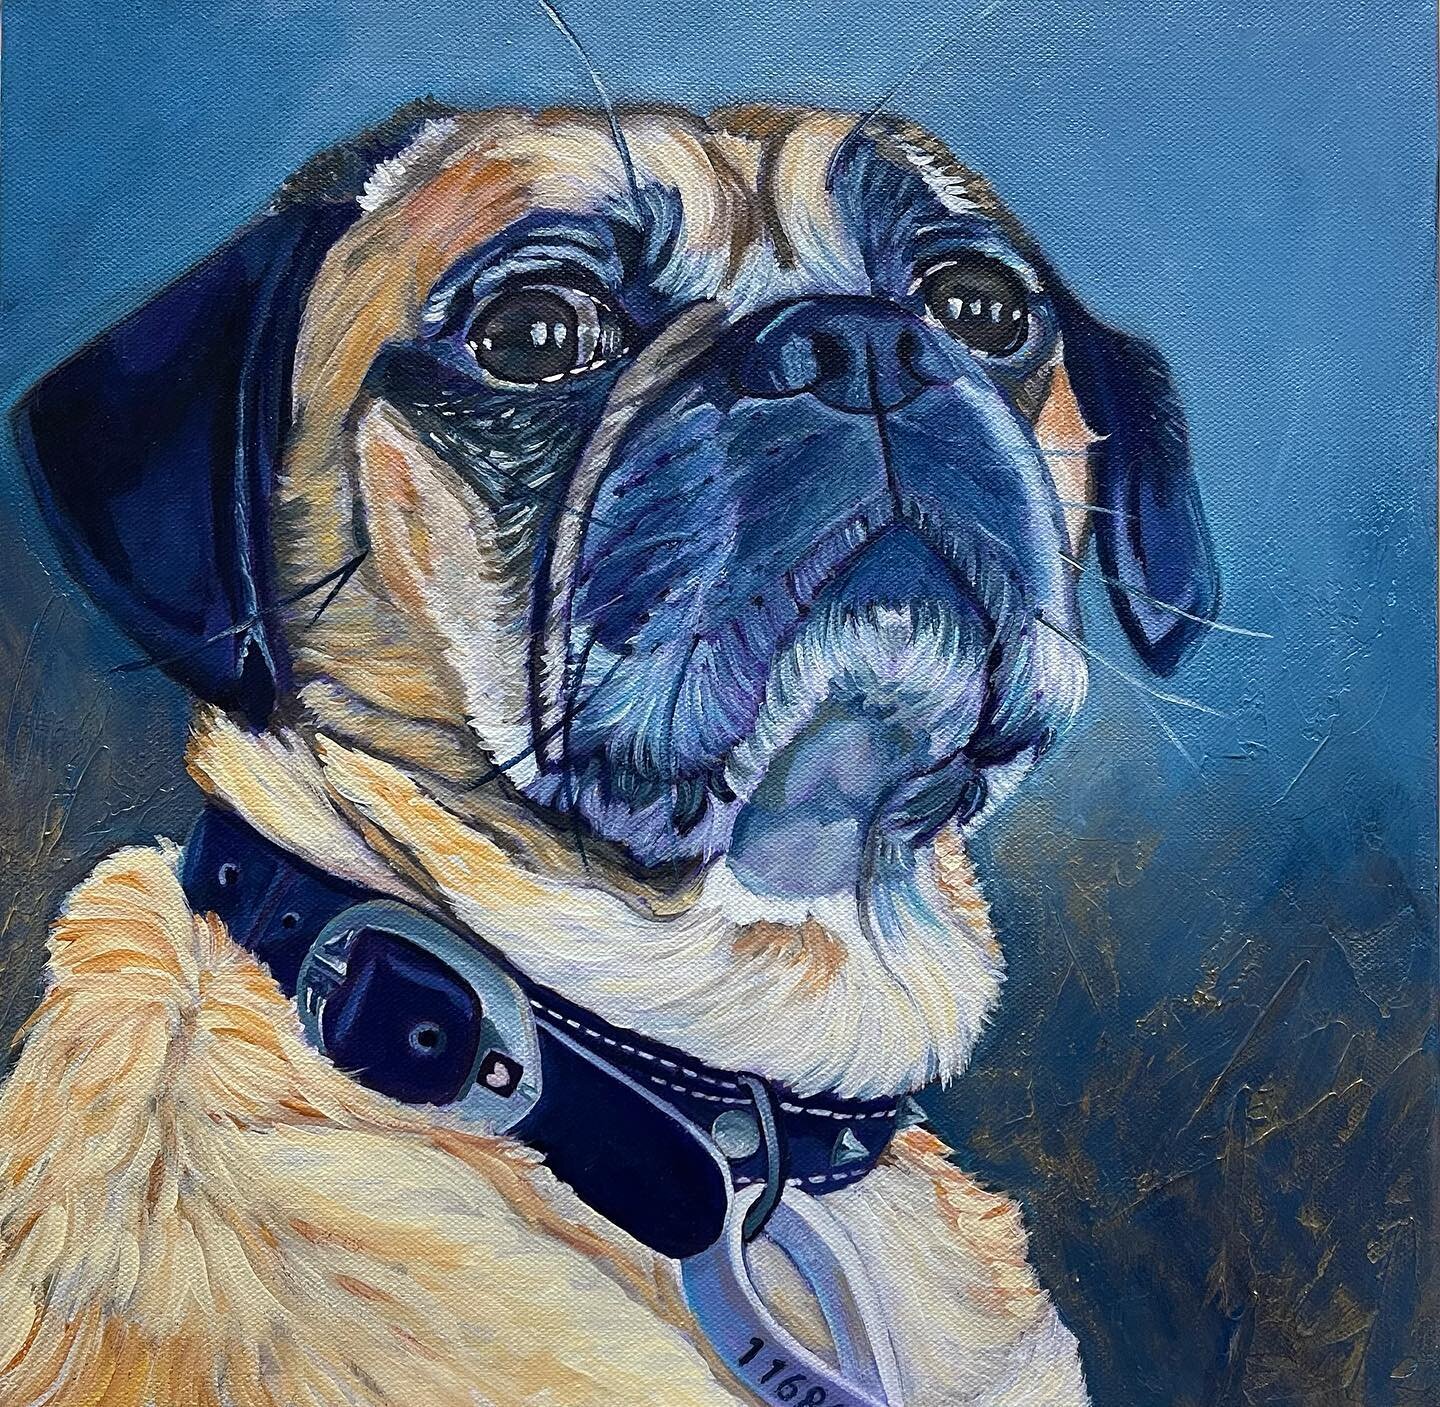 Latest commission. A much loved dog. I feel very honoured to be trusted to create these pet portraits. #petportraits #petsofaustralia #pugalier #chloemazzart